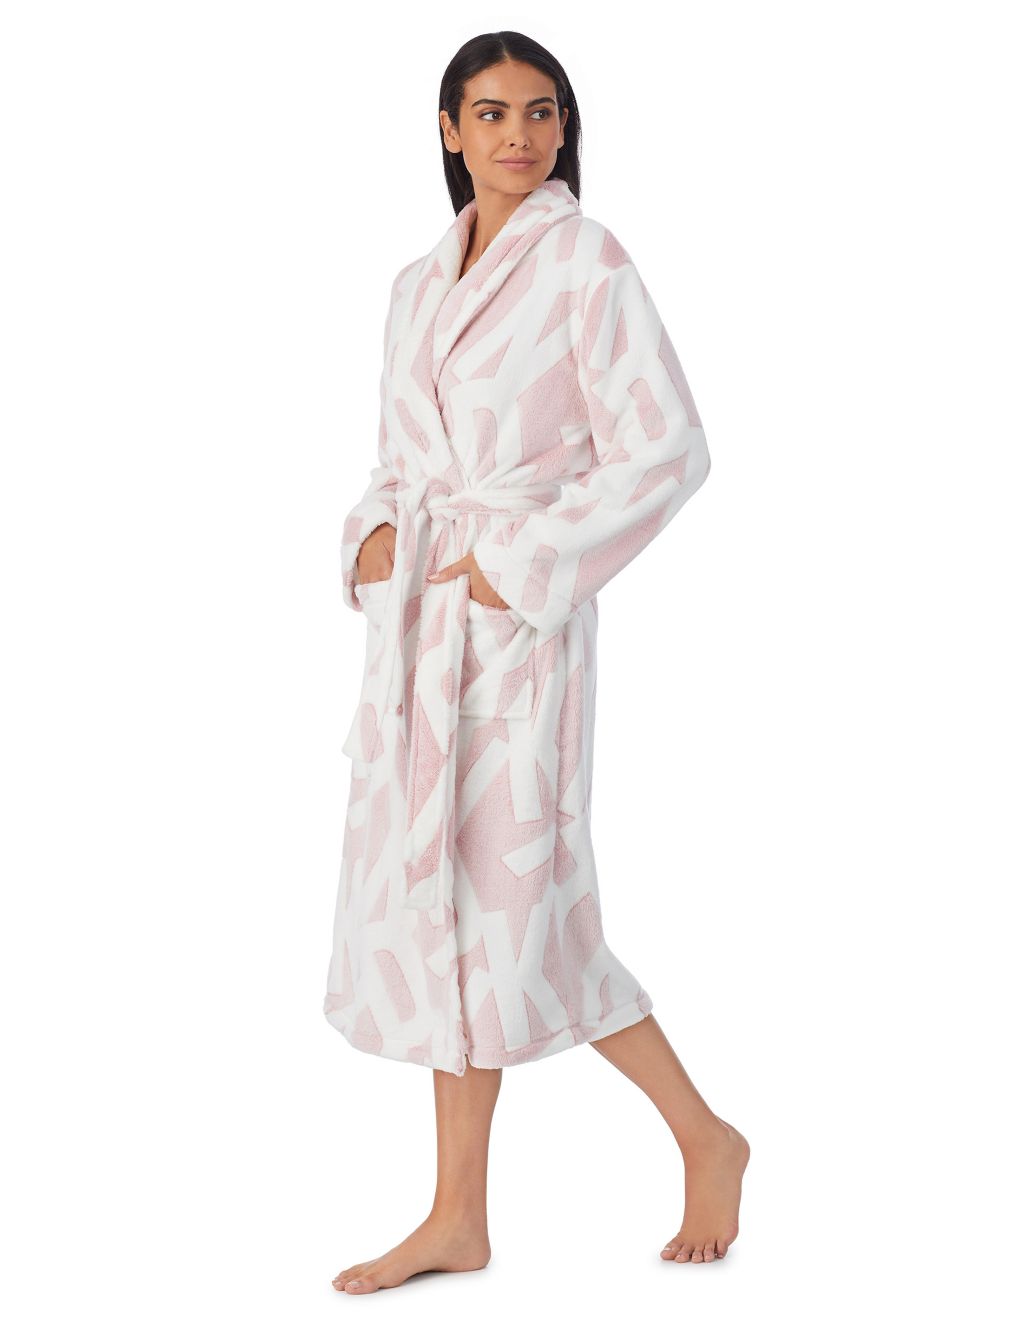 Dressing Gown image 2